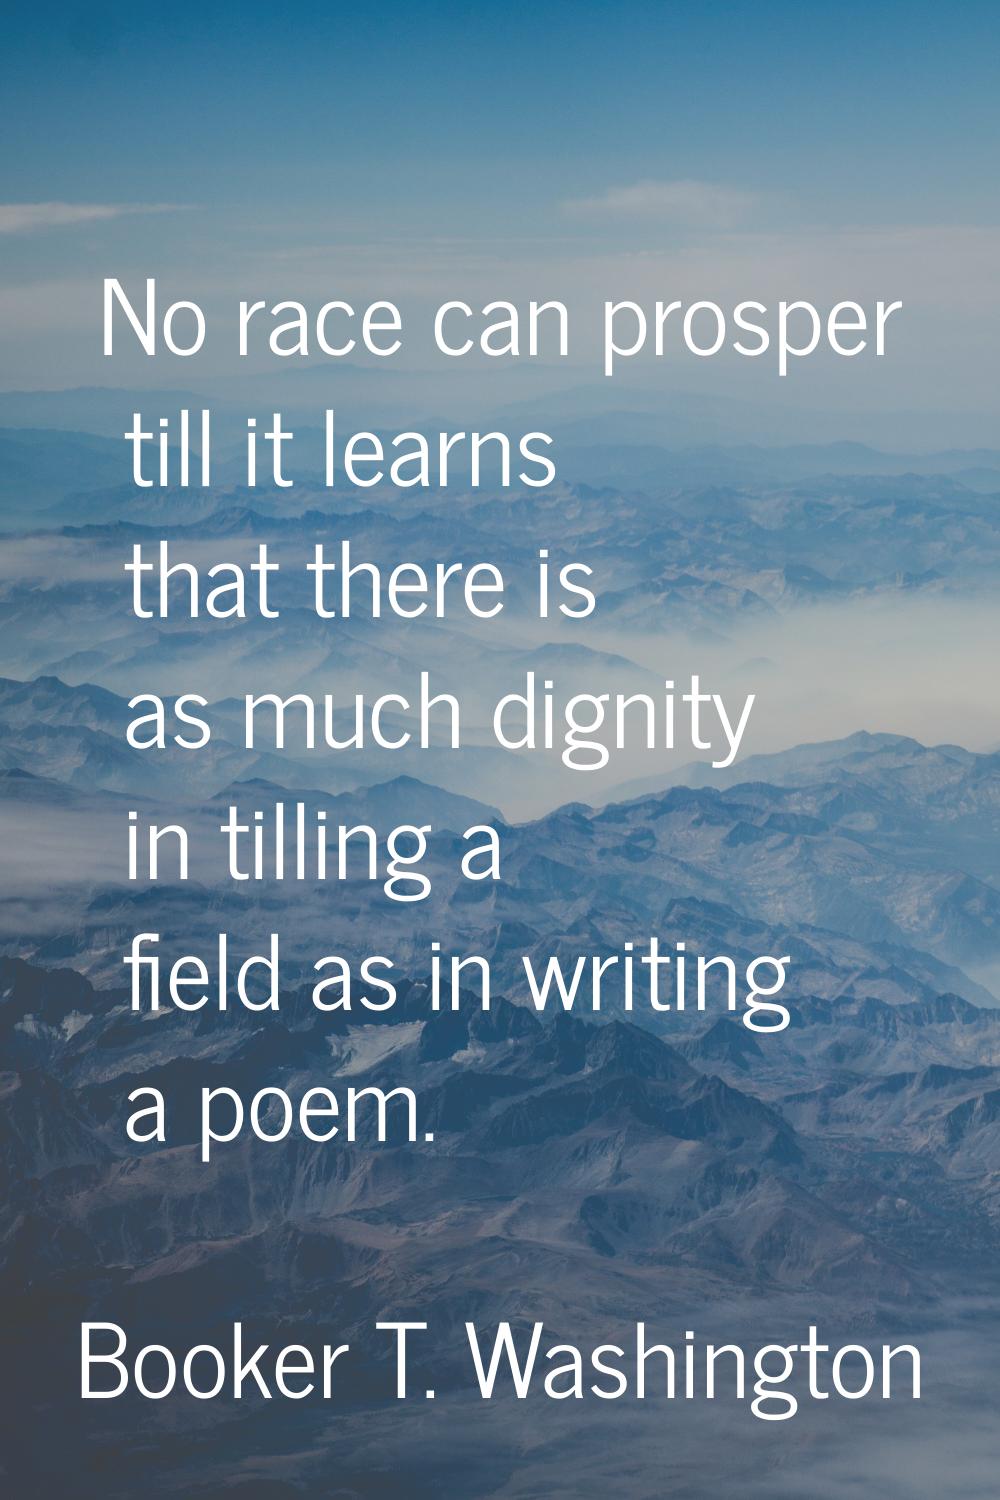 No race can prosper till it learns that there is as much dignity in tilling a field as in writing a